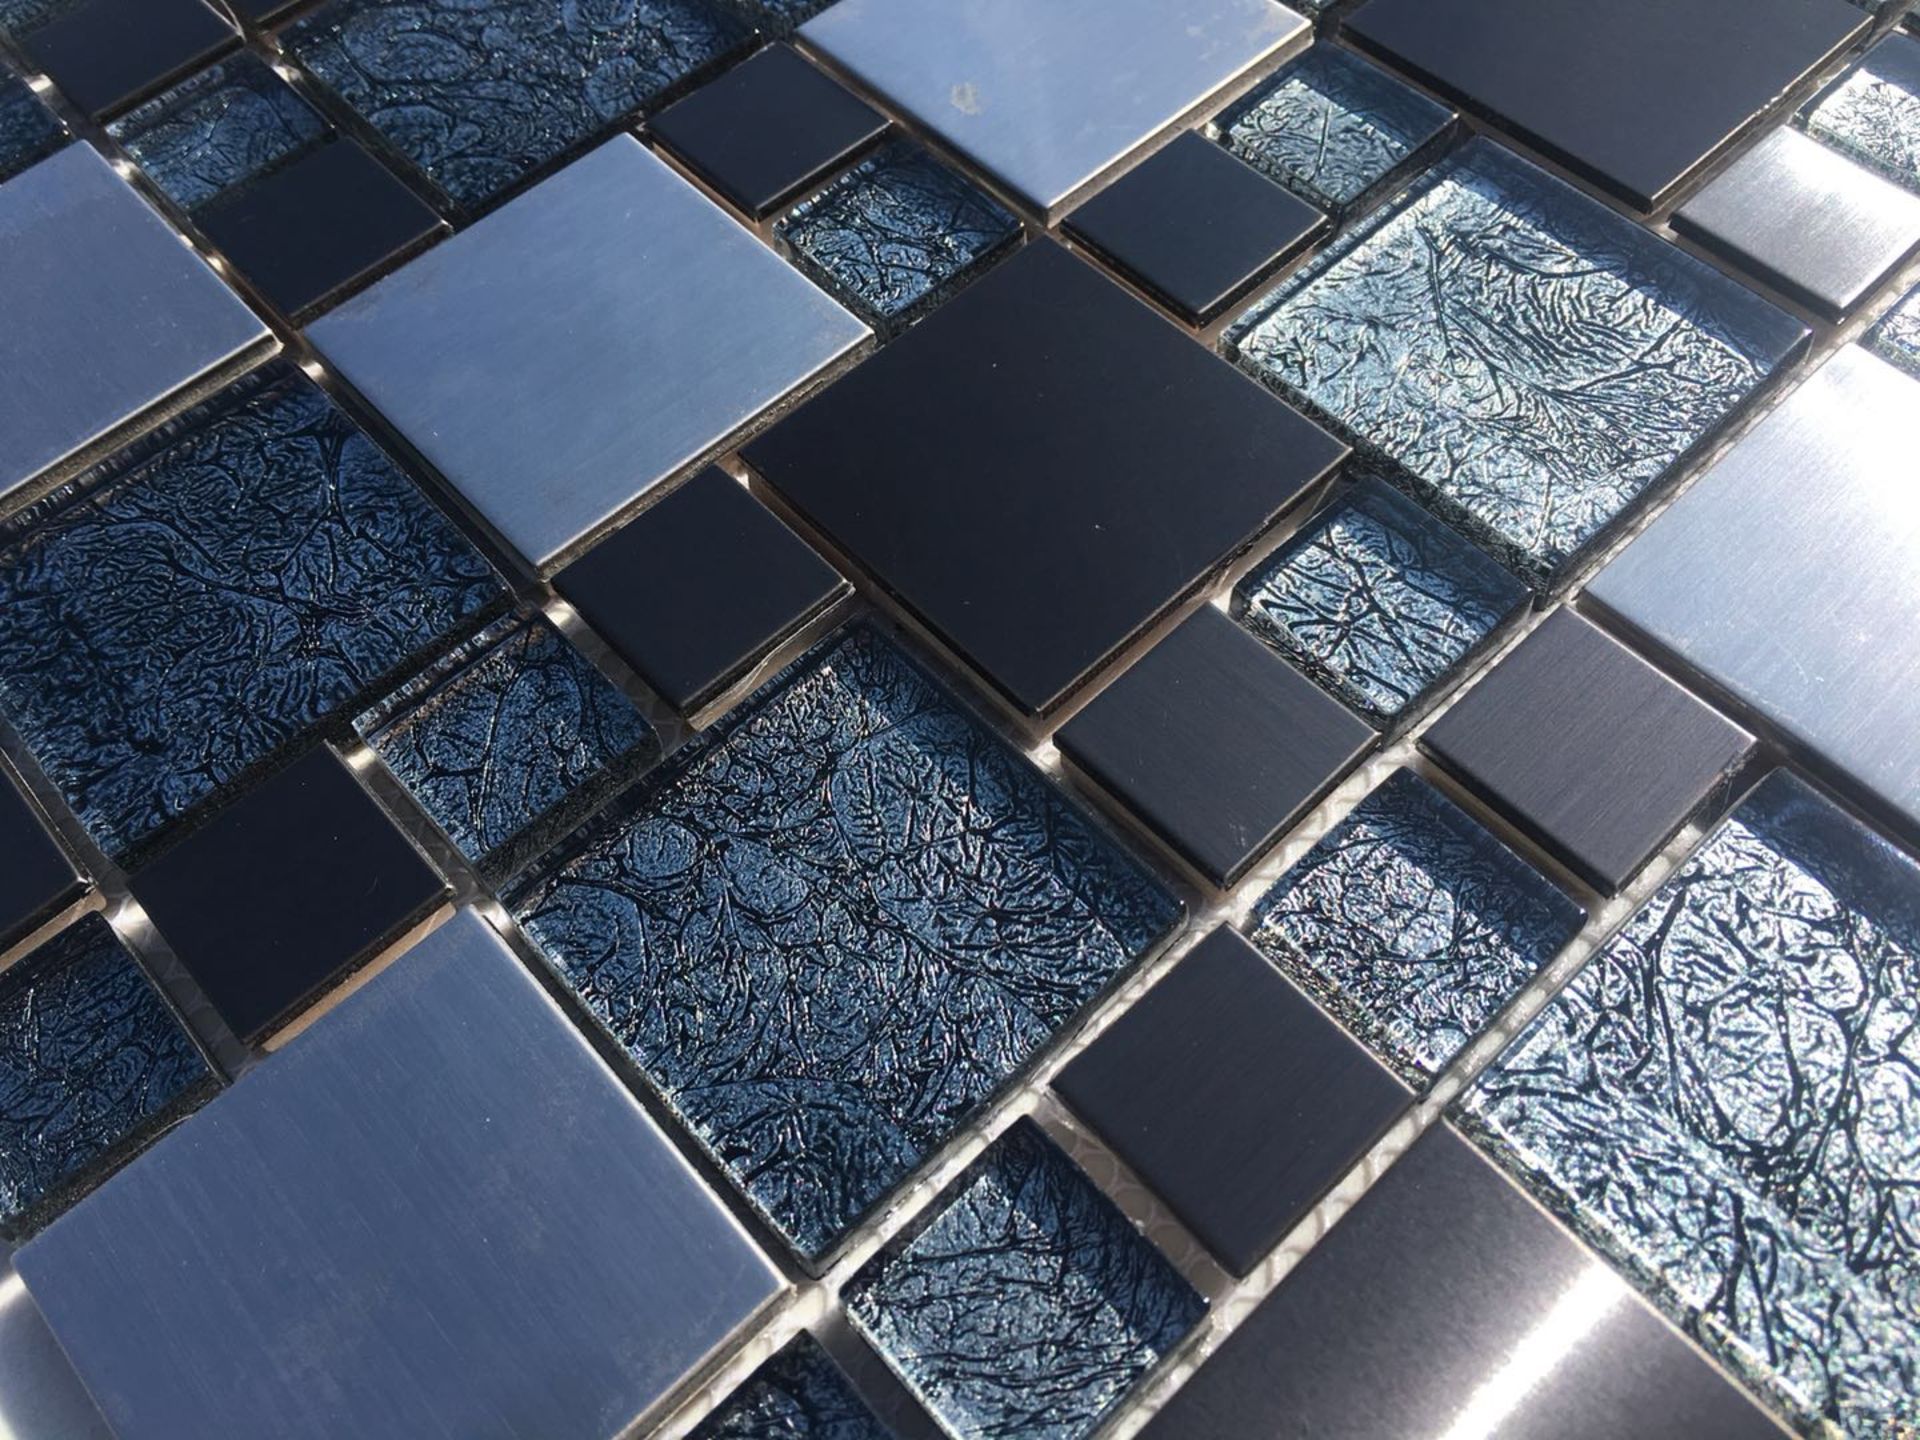 10 Square Metres - High Quality Glass/Stainless Steel Mosaic Tiles - Image 5 of 5